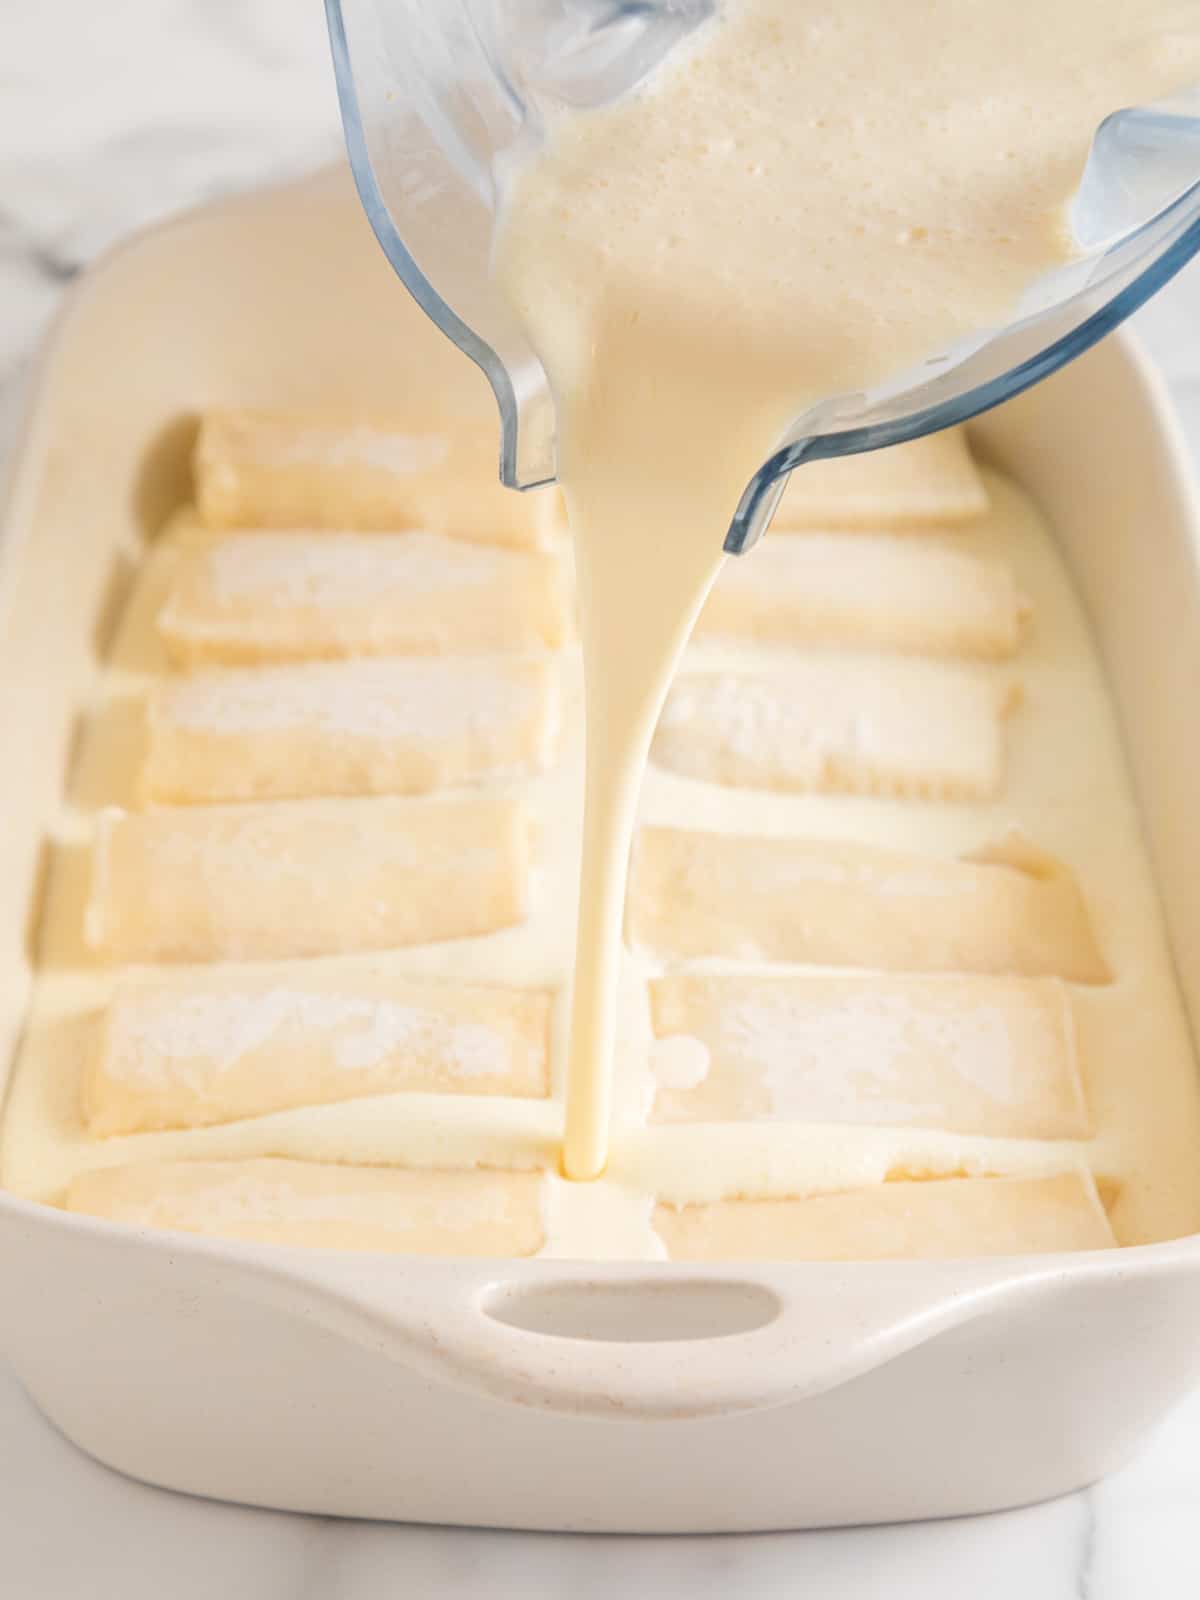 Blintzes lined up in the casserole with souffle batter being poured over.